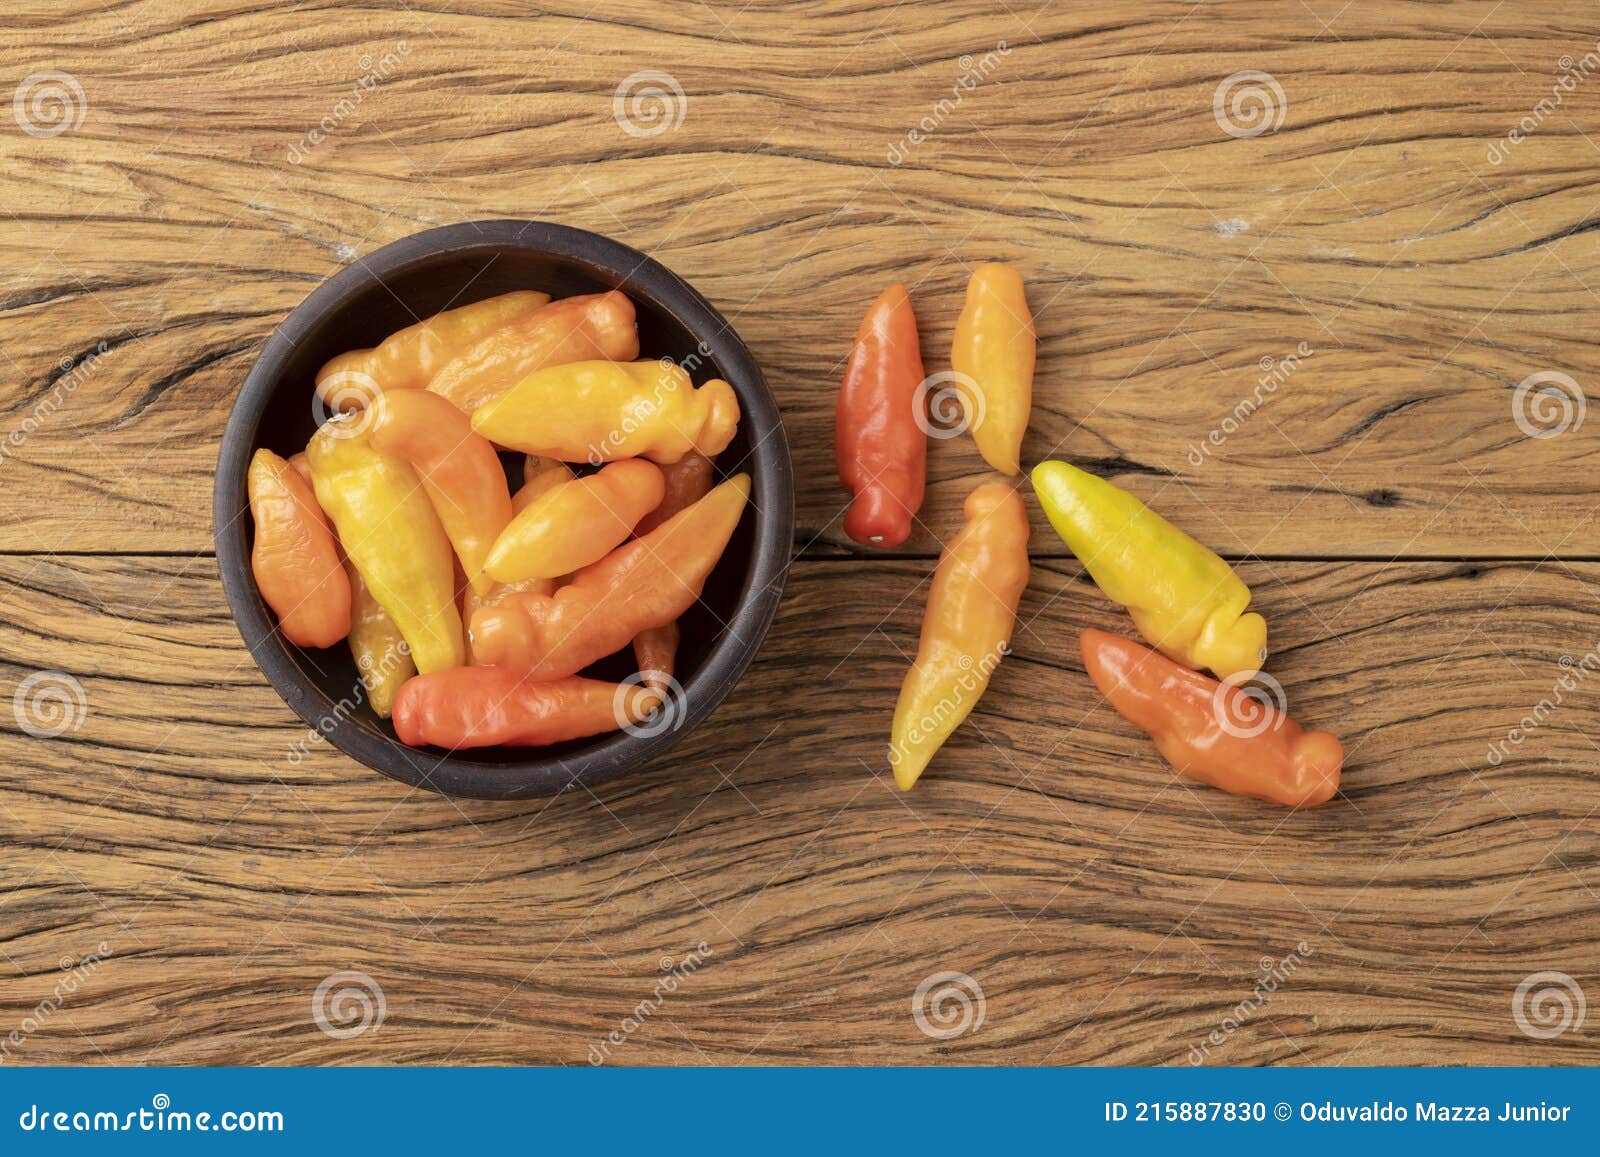 orange cheiro scent/smell pepper on a bowl over wooden table